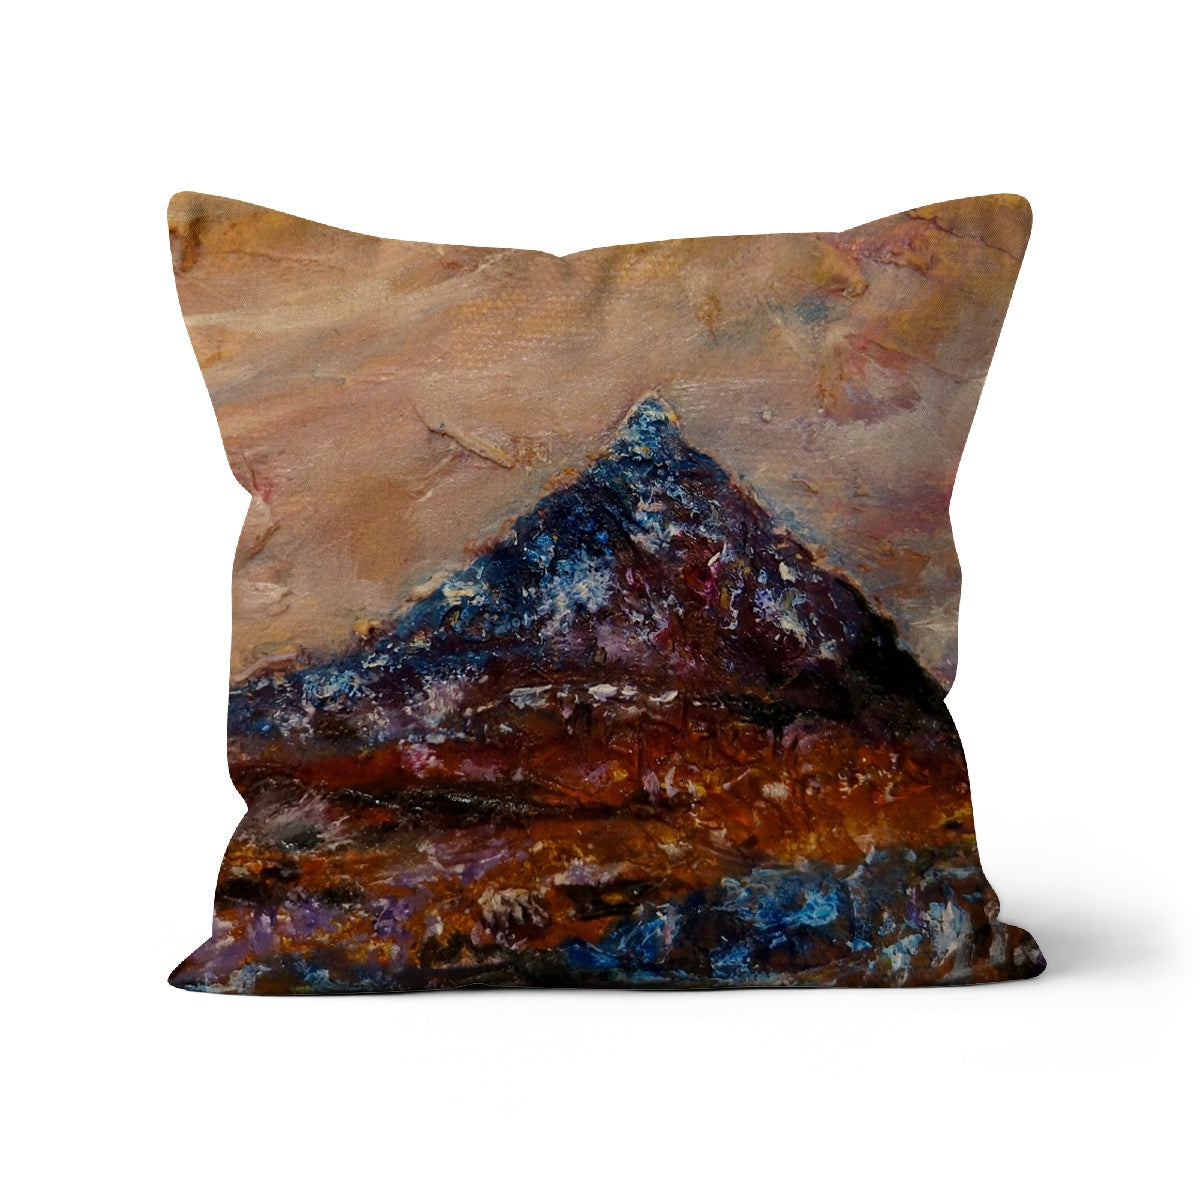 Buachaille Etive Mòr Art Gifts Cushion-Cushions-Glencoe Art Gallery-Faux Suede-24"x24"-Paintings, Prints, Homeware, Art Gifts From Scotland By Scottish Artist Kevin Hunter